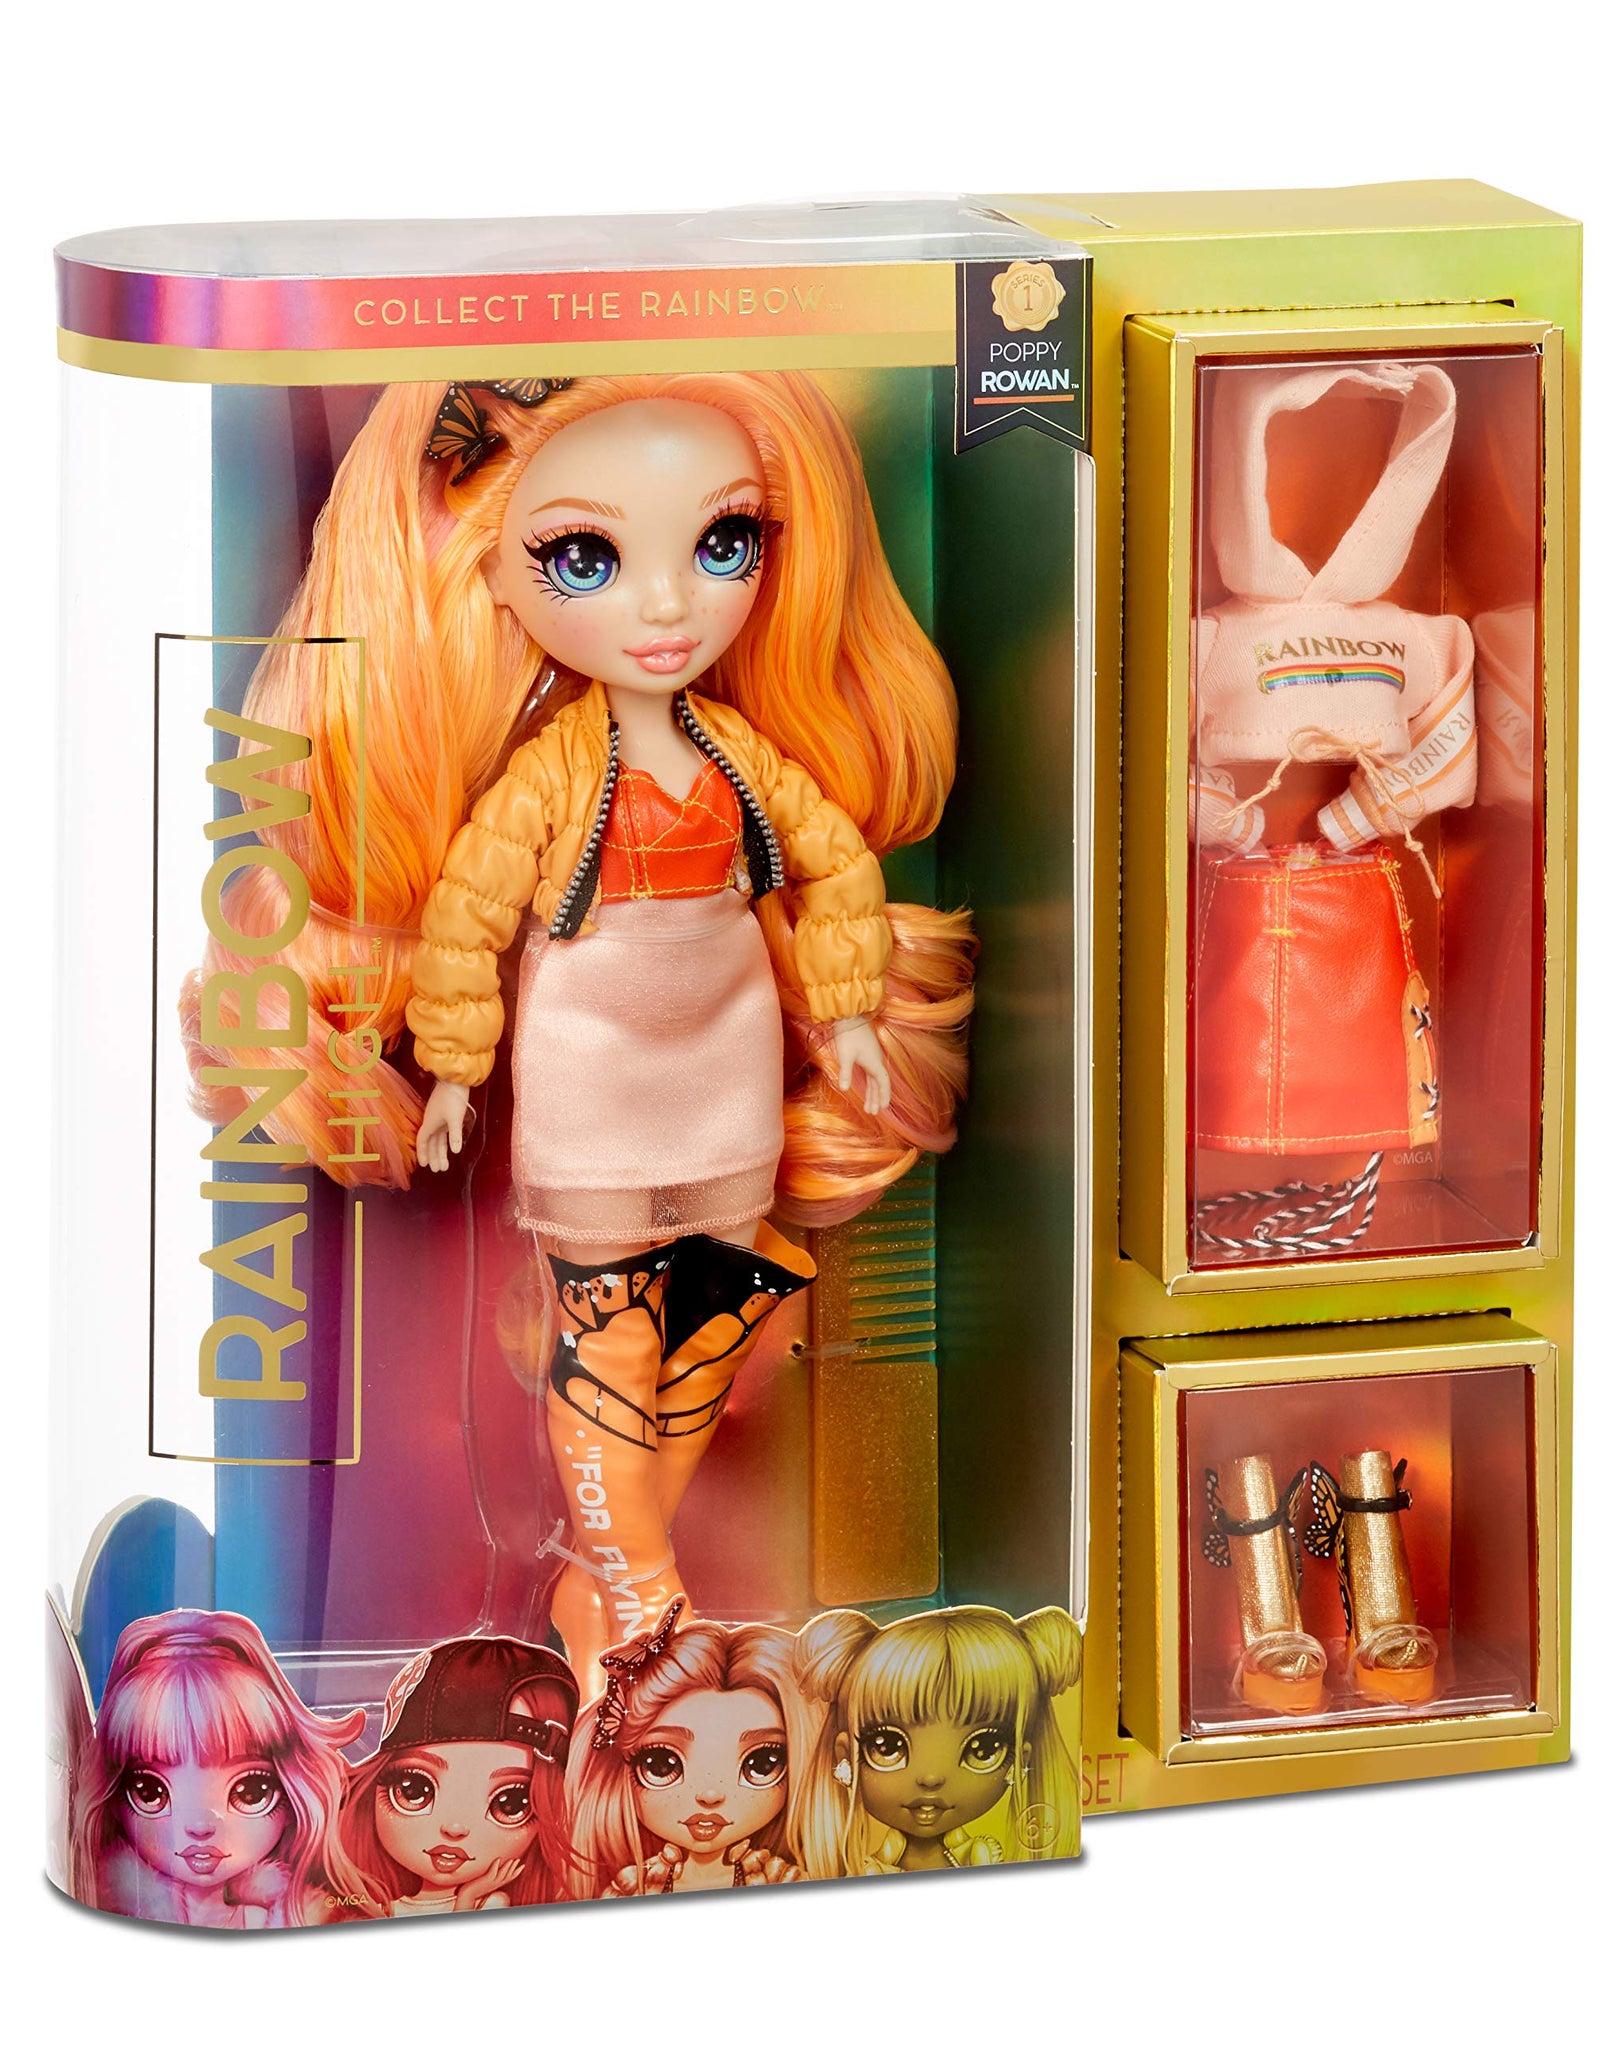 Rainbow Surprise Rainbow High Poppy Rowan - Orange Clothes Fashion Doll with 2 Complete Mix & Match Outfits and Accessories, Toys for Kids 6 to 12 Years Old